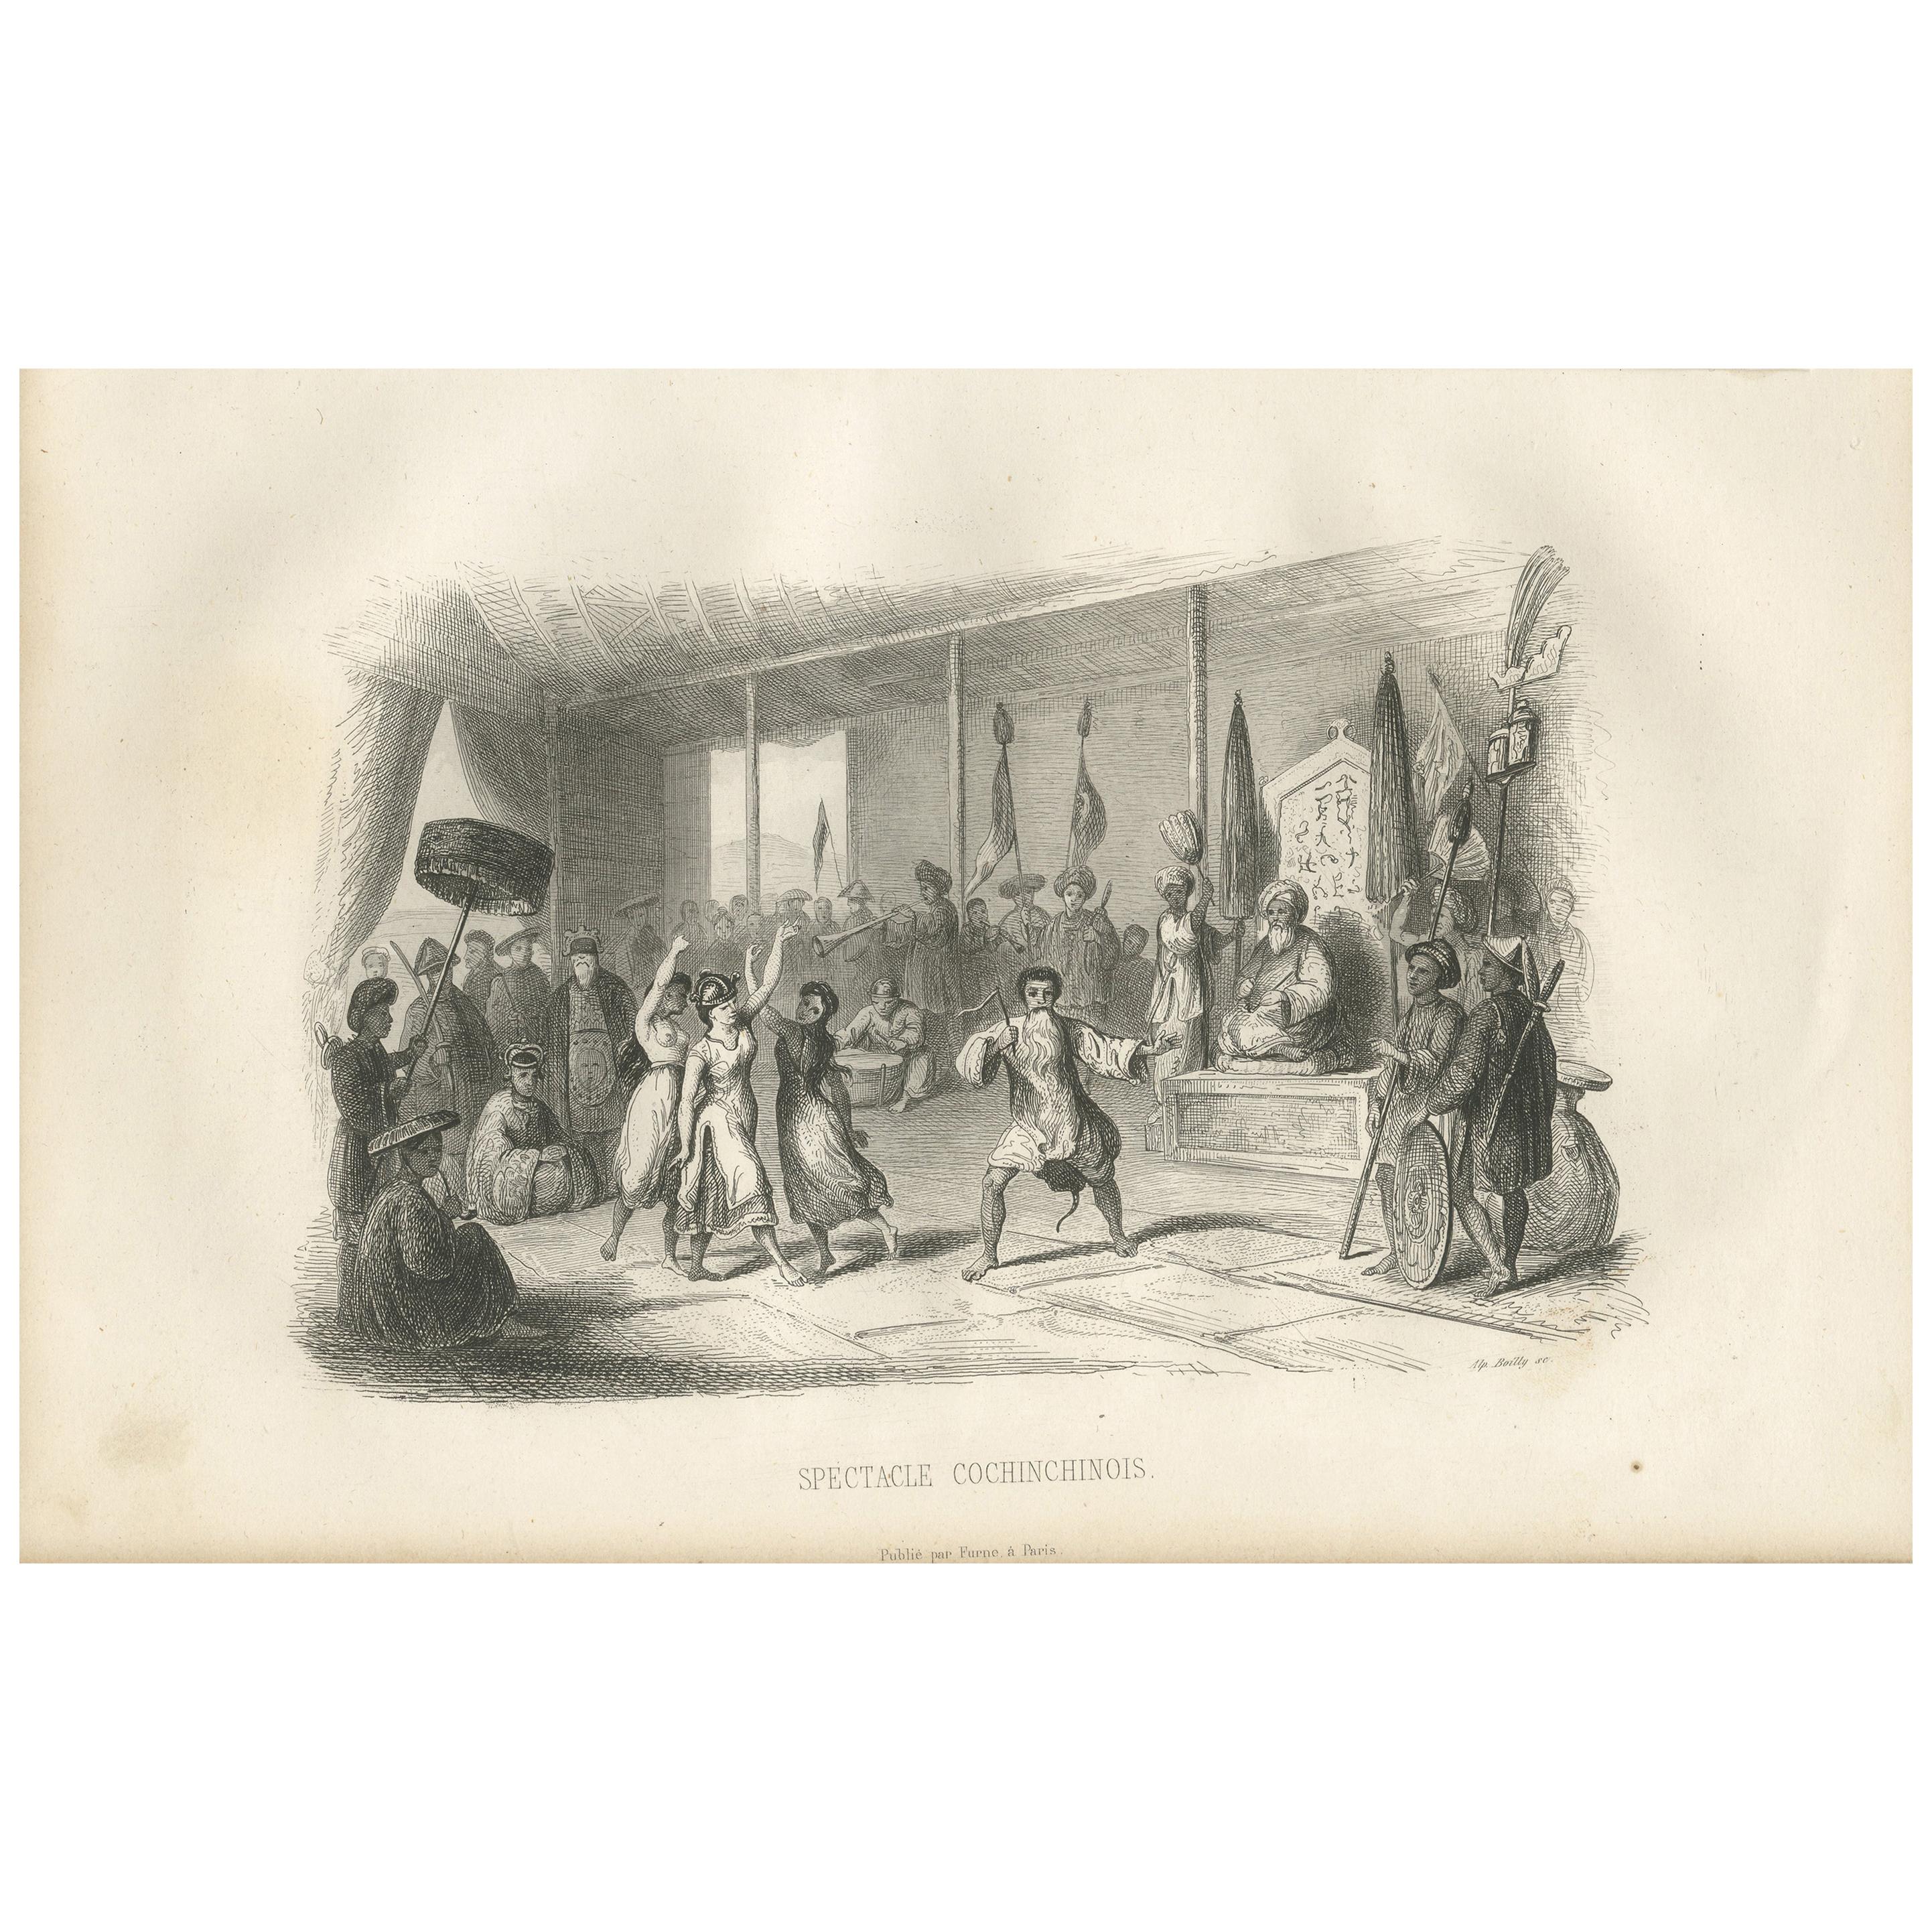 Antique Print of a Show in Cochinchina by D'Urville (1853)